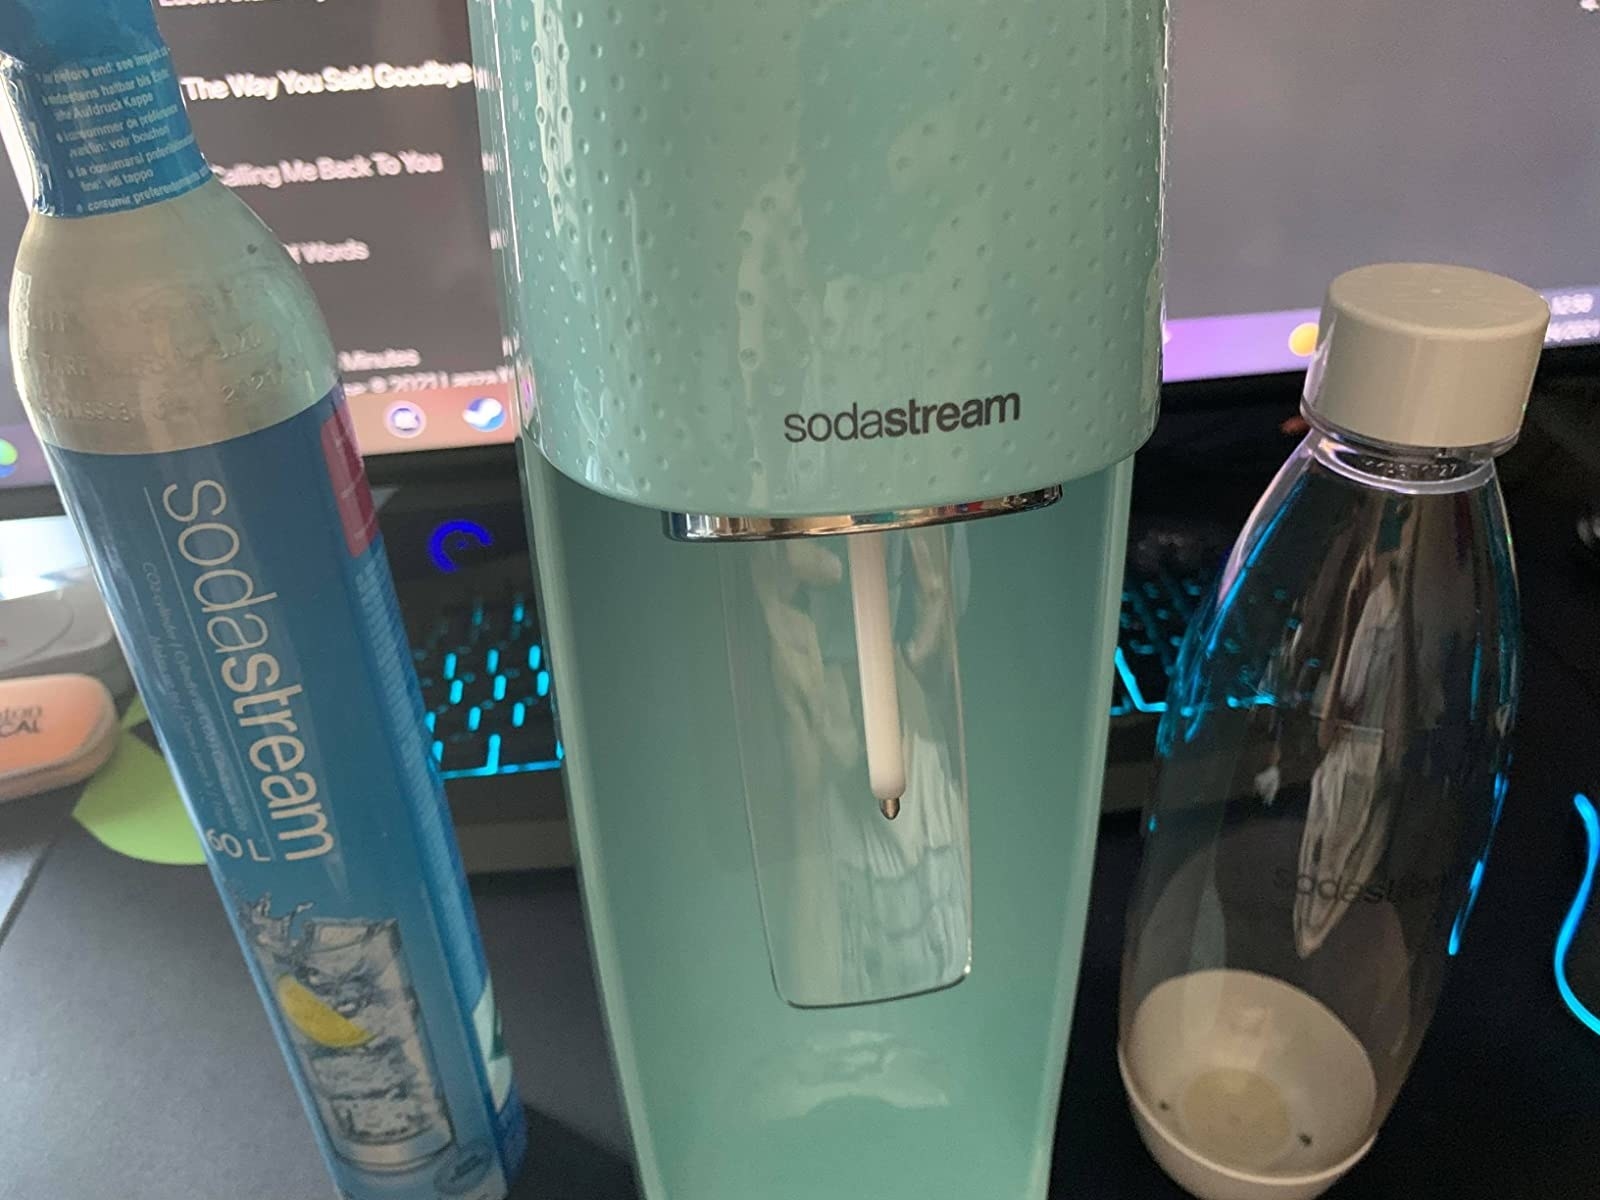 The complete package with a teal-colored SodaStream, fizz-maker, and bottle